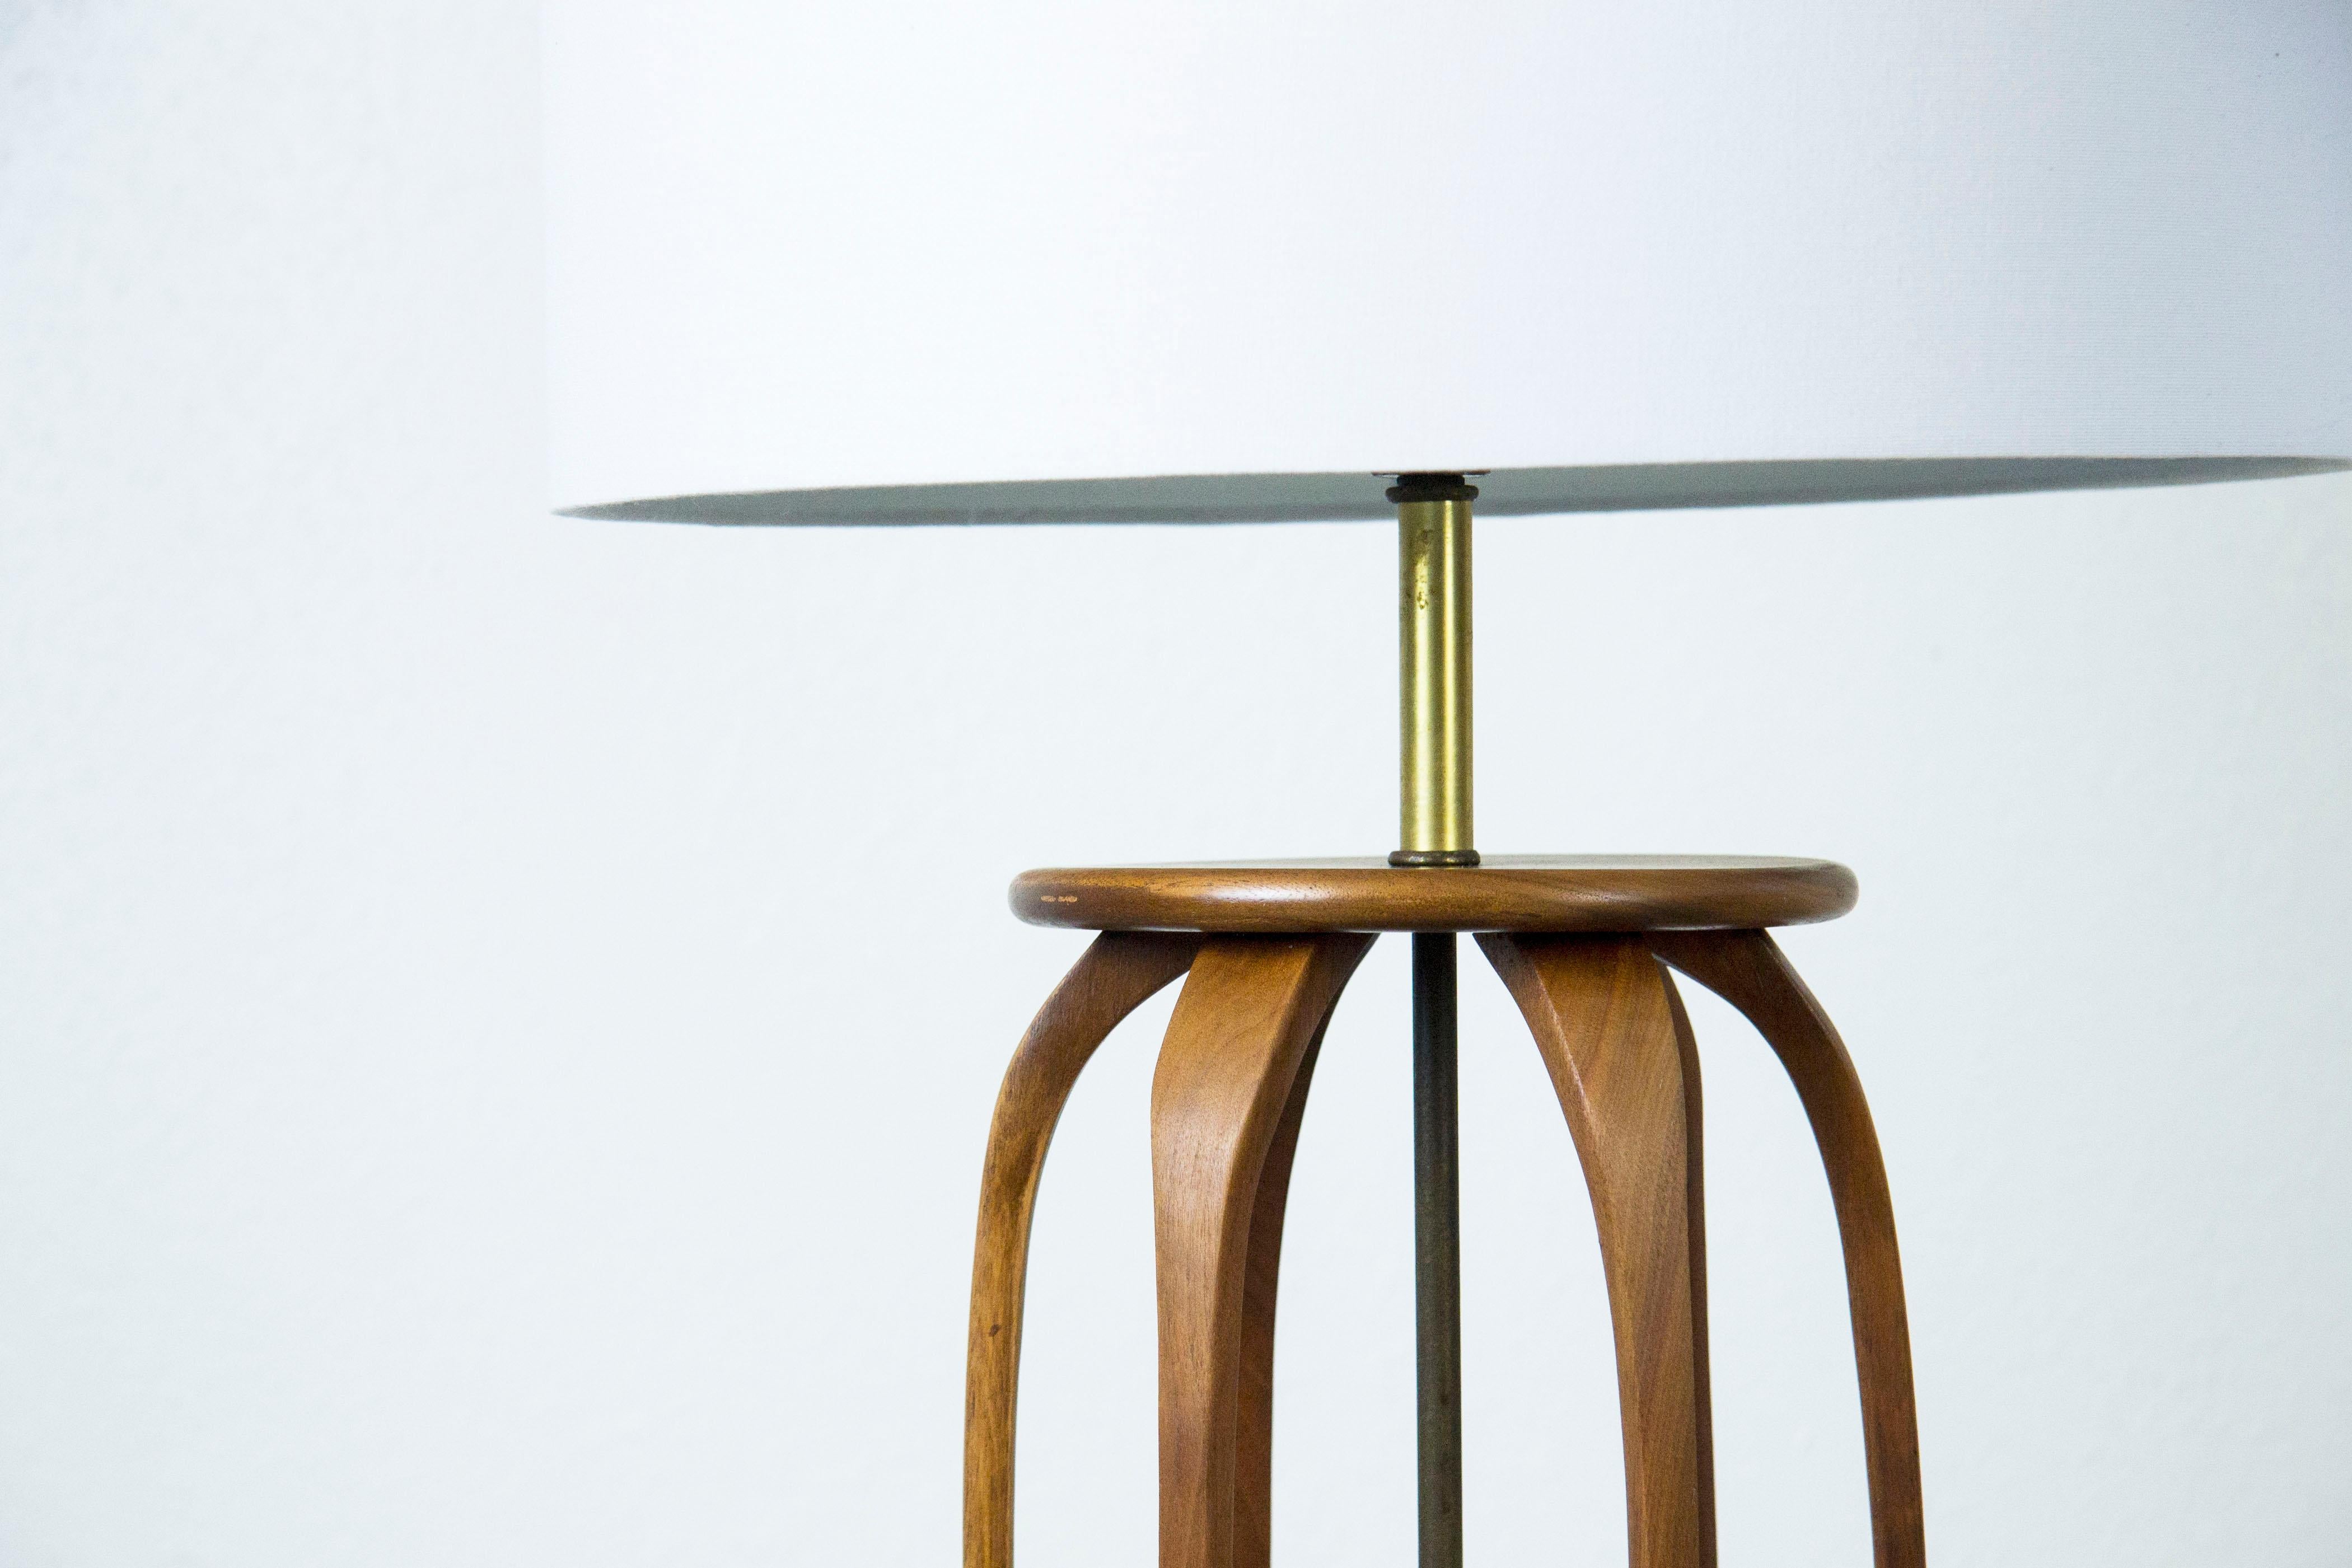 American Mid-Century Modern Walnut and Brass Table Lamp by Modeline